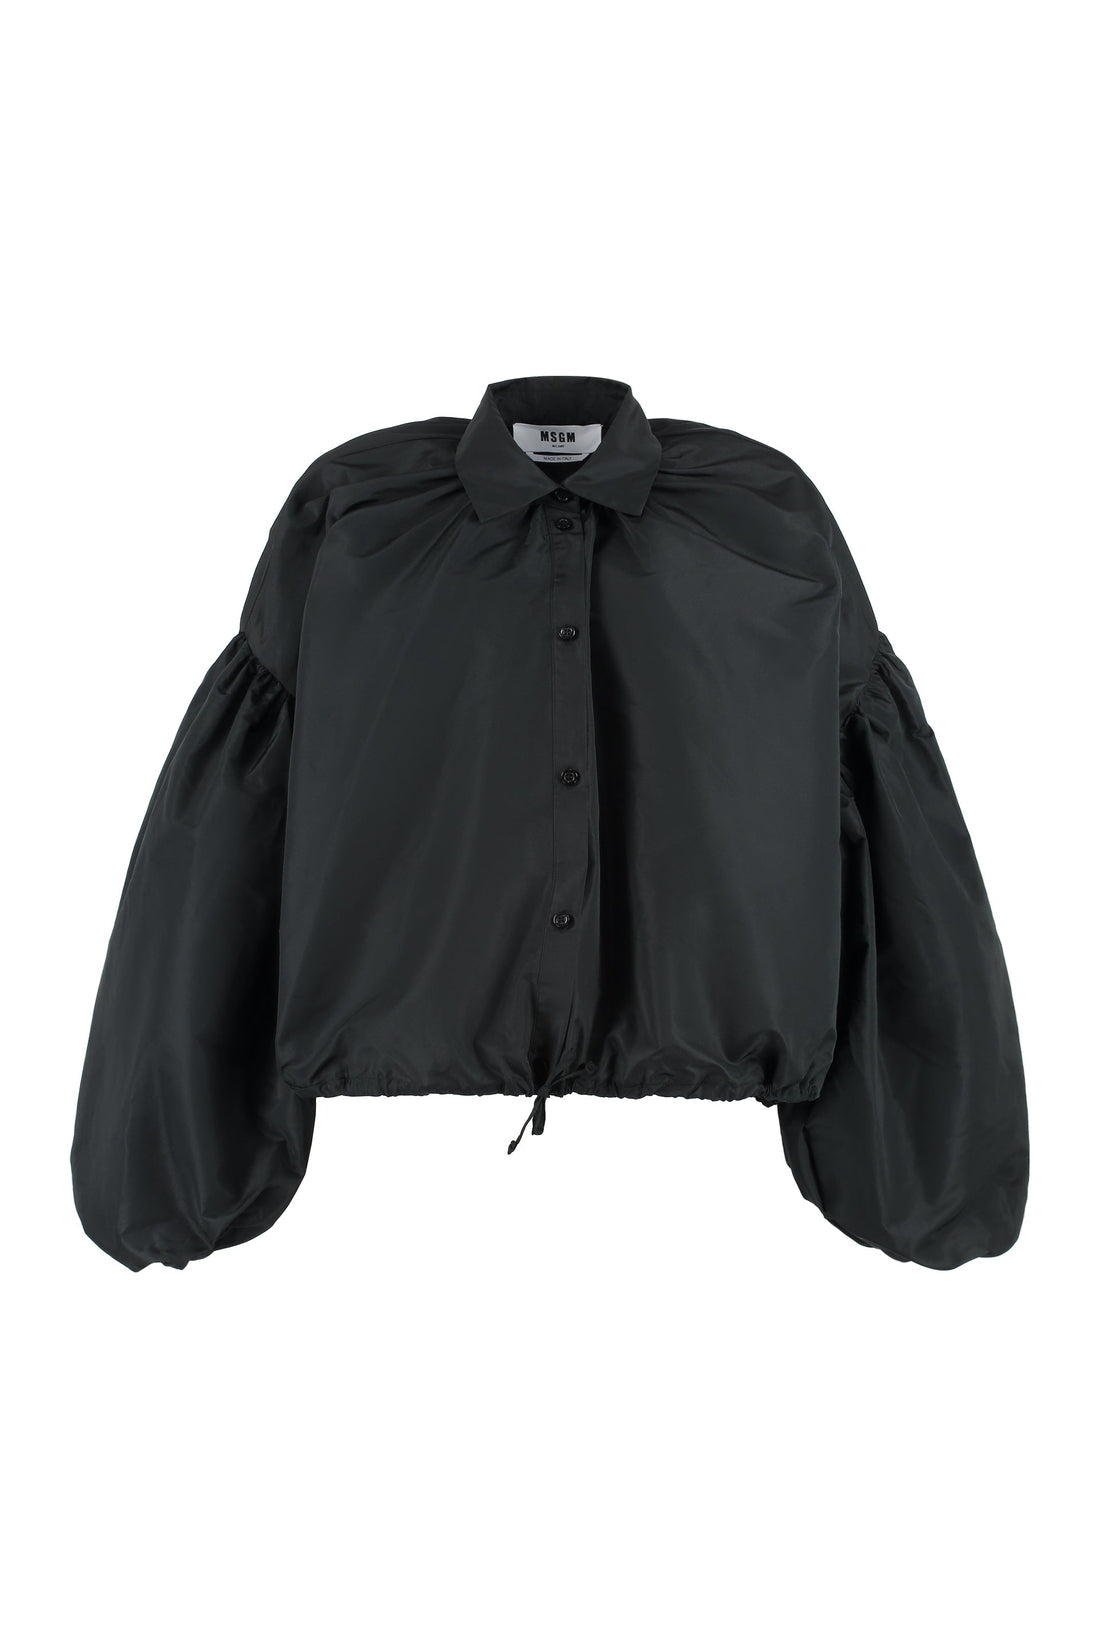 MSGM-OUTLET-SALE-Puffed sleeves shirt-ARCHIVIST